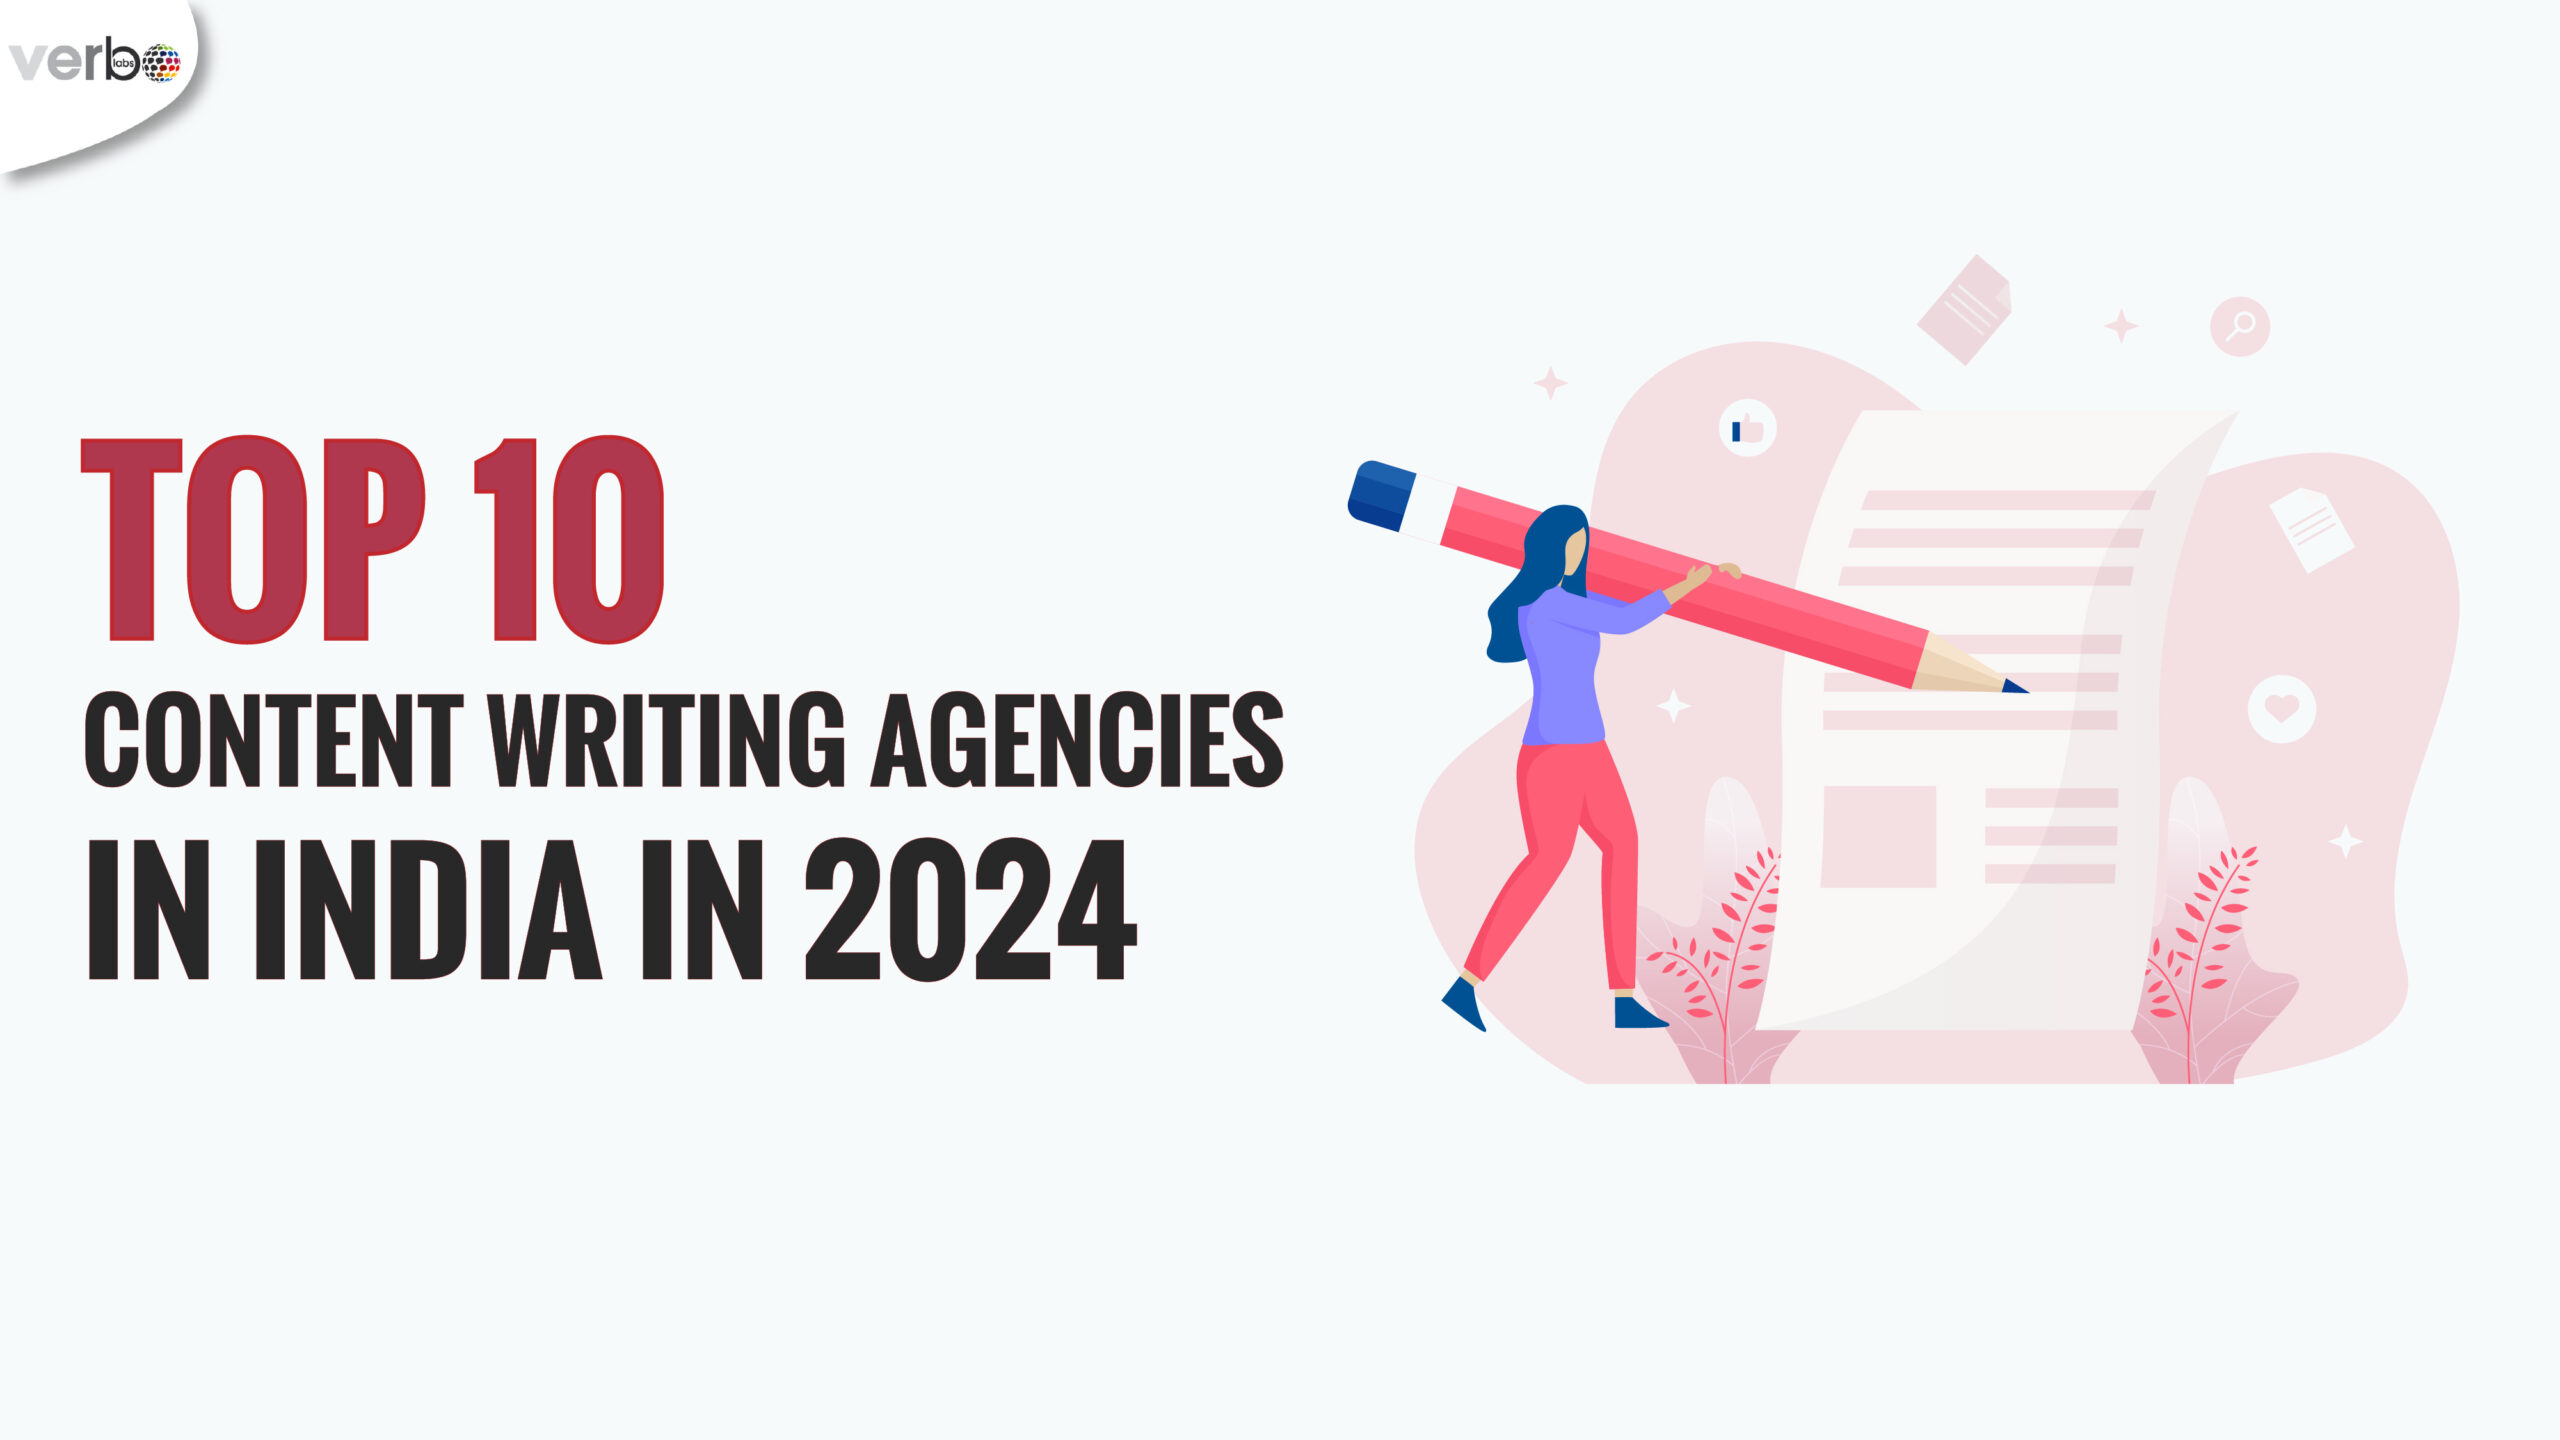 Top 10 content writing agencies in India in 2024